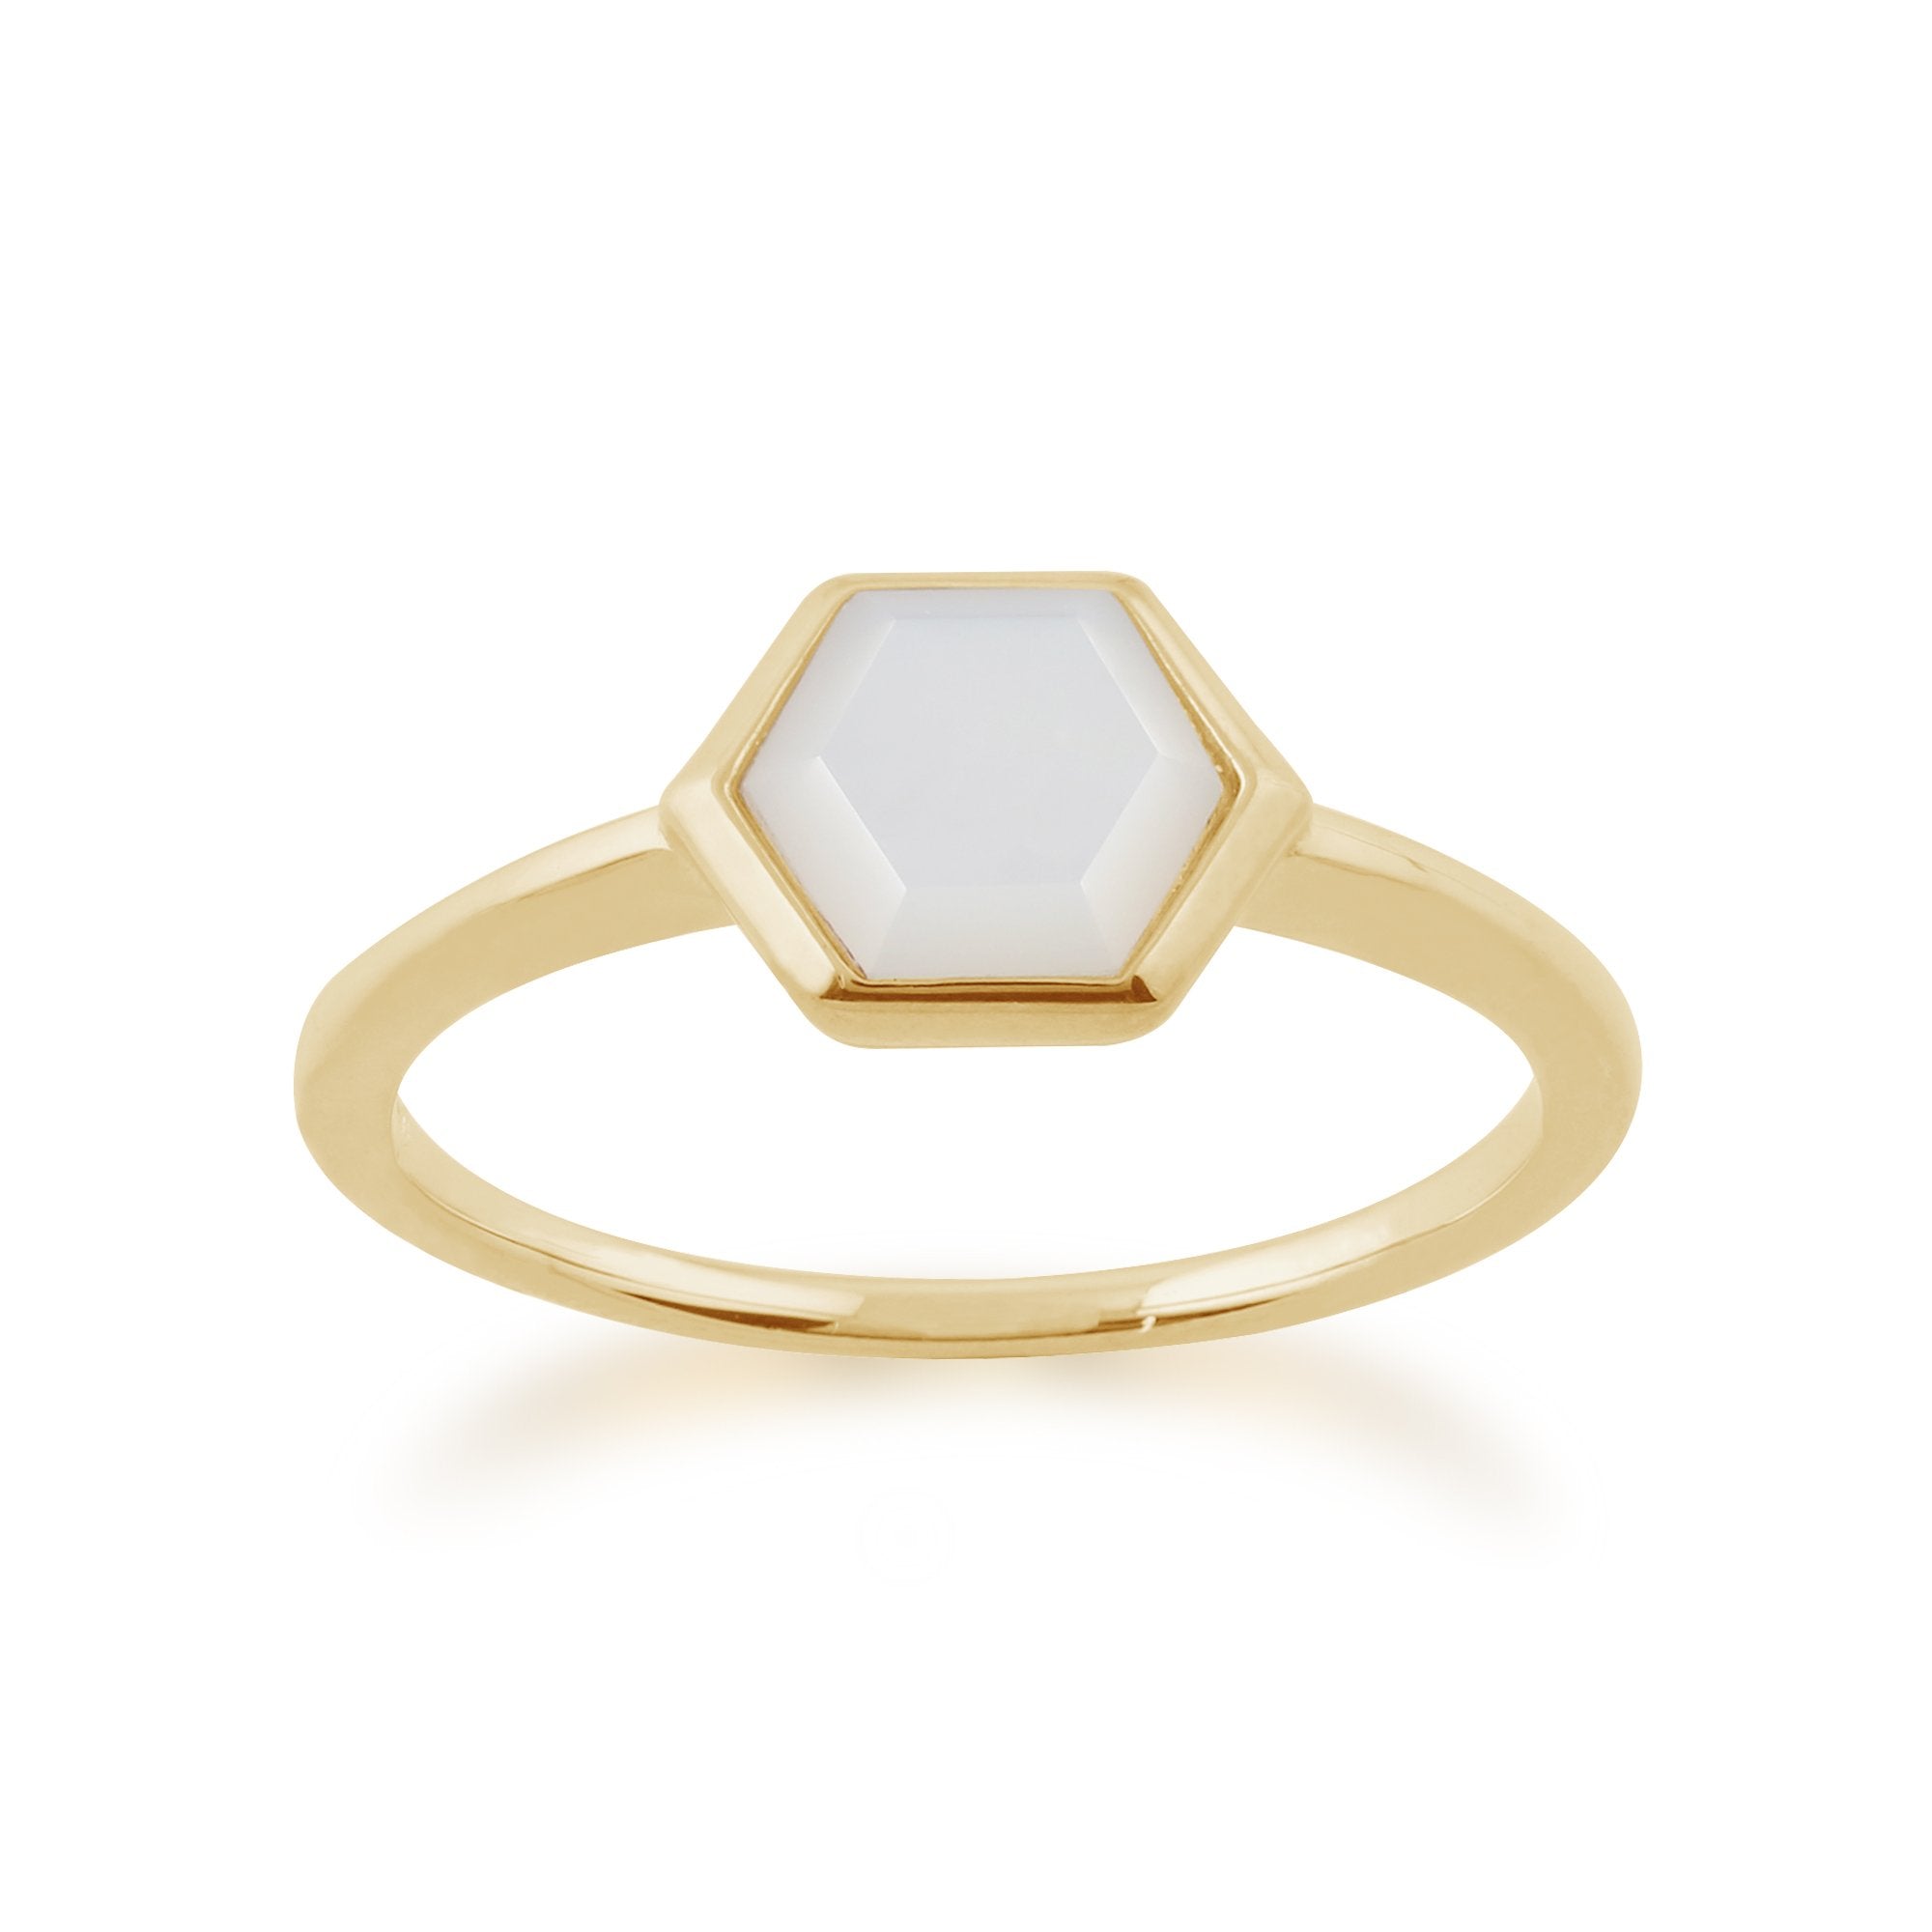 Gemondo Gold Plated Sterling Silver 1.1ct Mother of Pearl Hexagonal Prism Ring Image 1